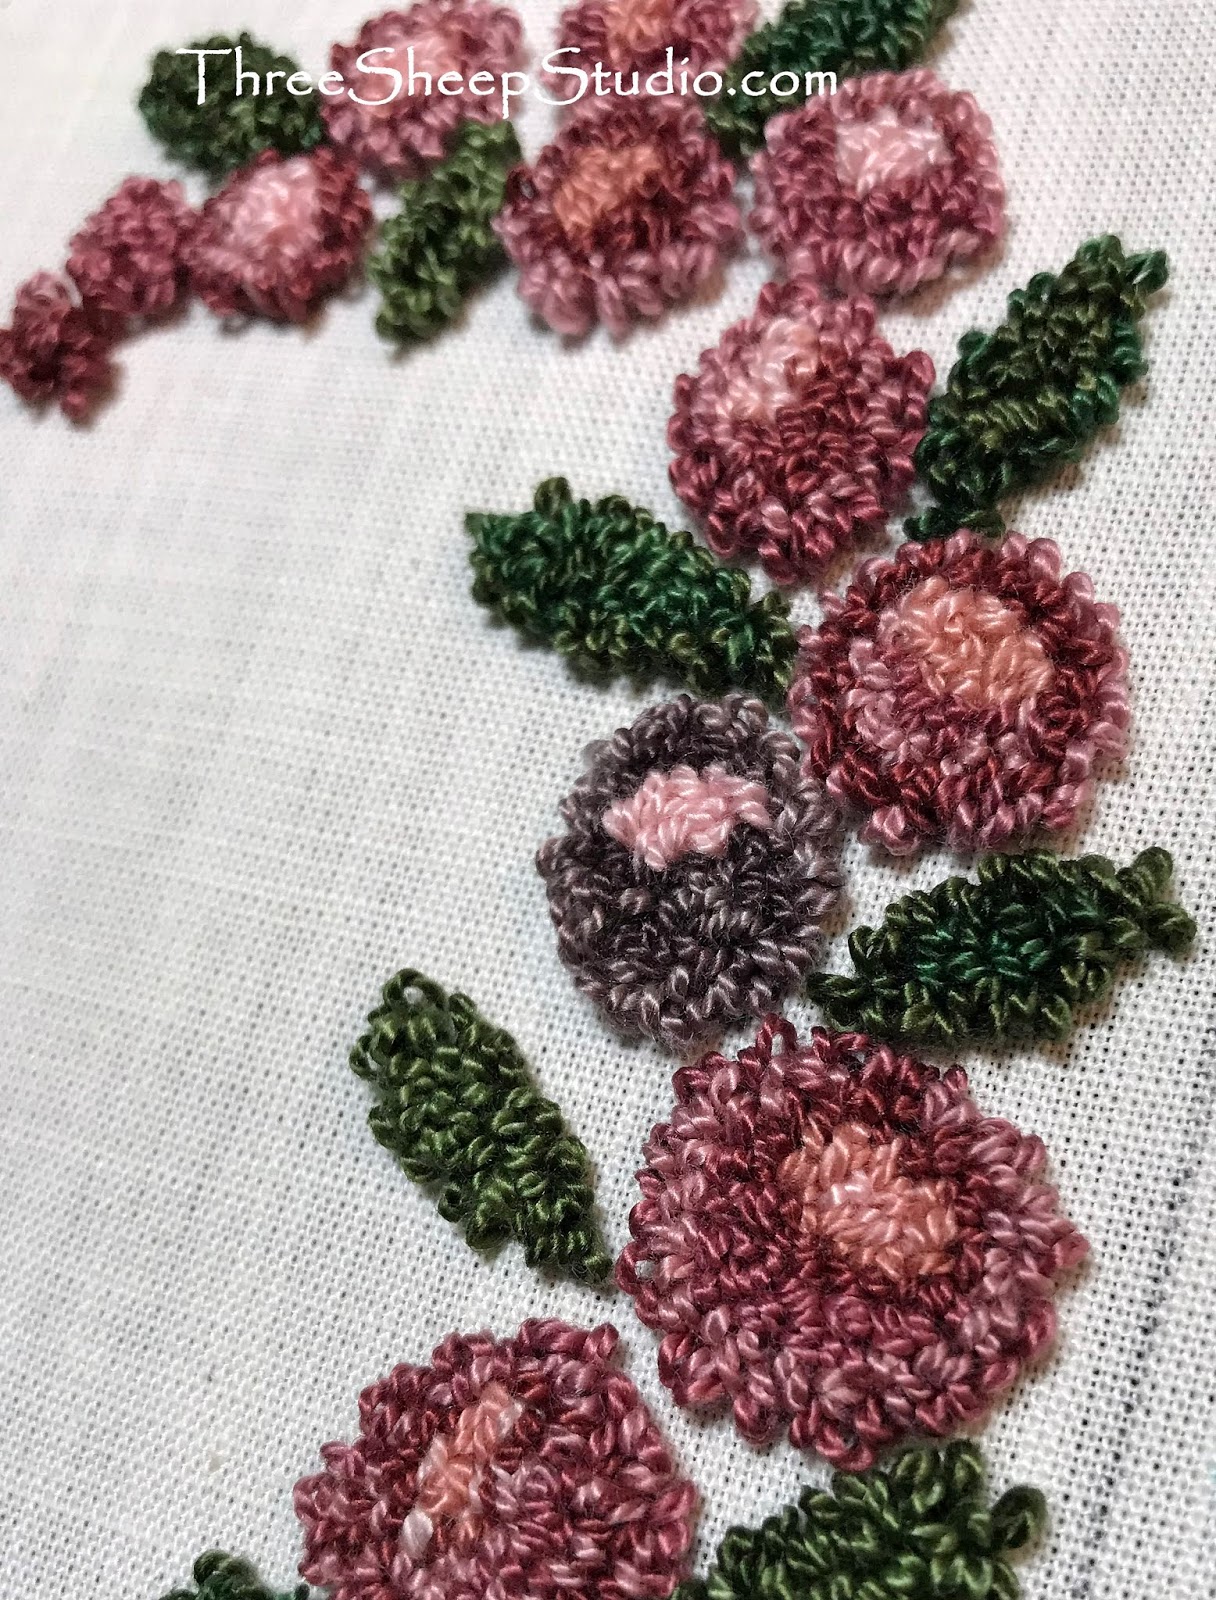 Three Sheep Studio: Punch Needle and Hand Embroidery Combo...